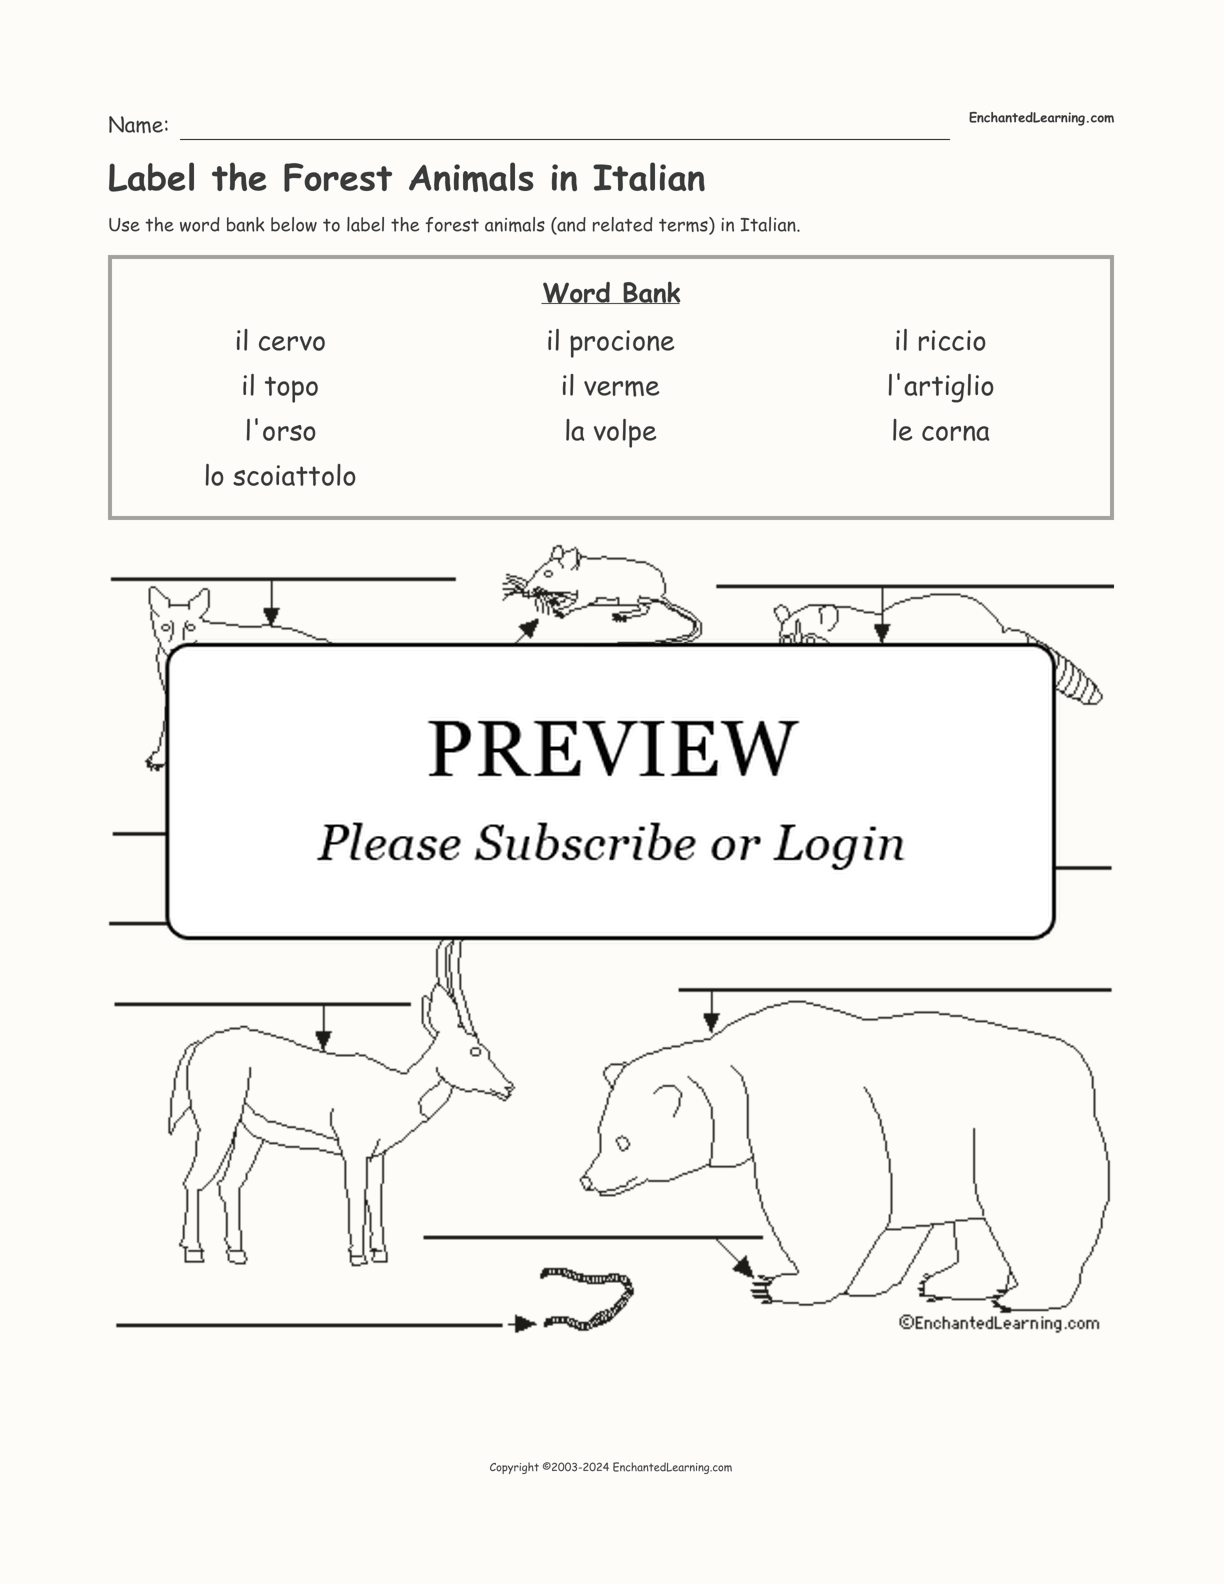 Label the Forest Animals in Italian interactive worksheet page 1